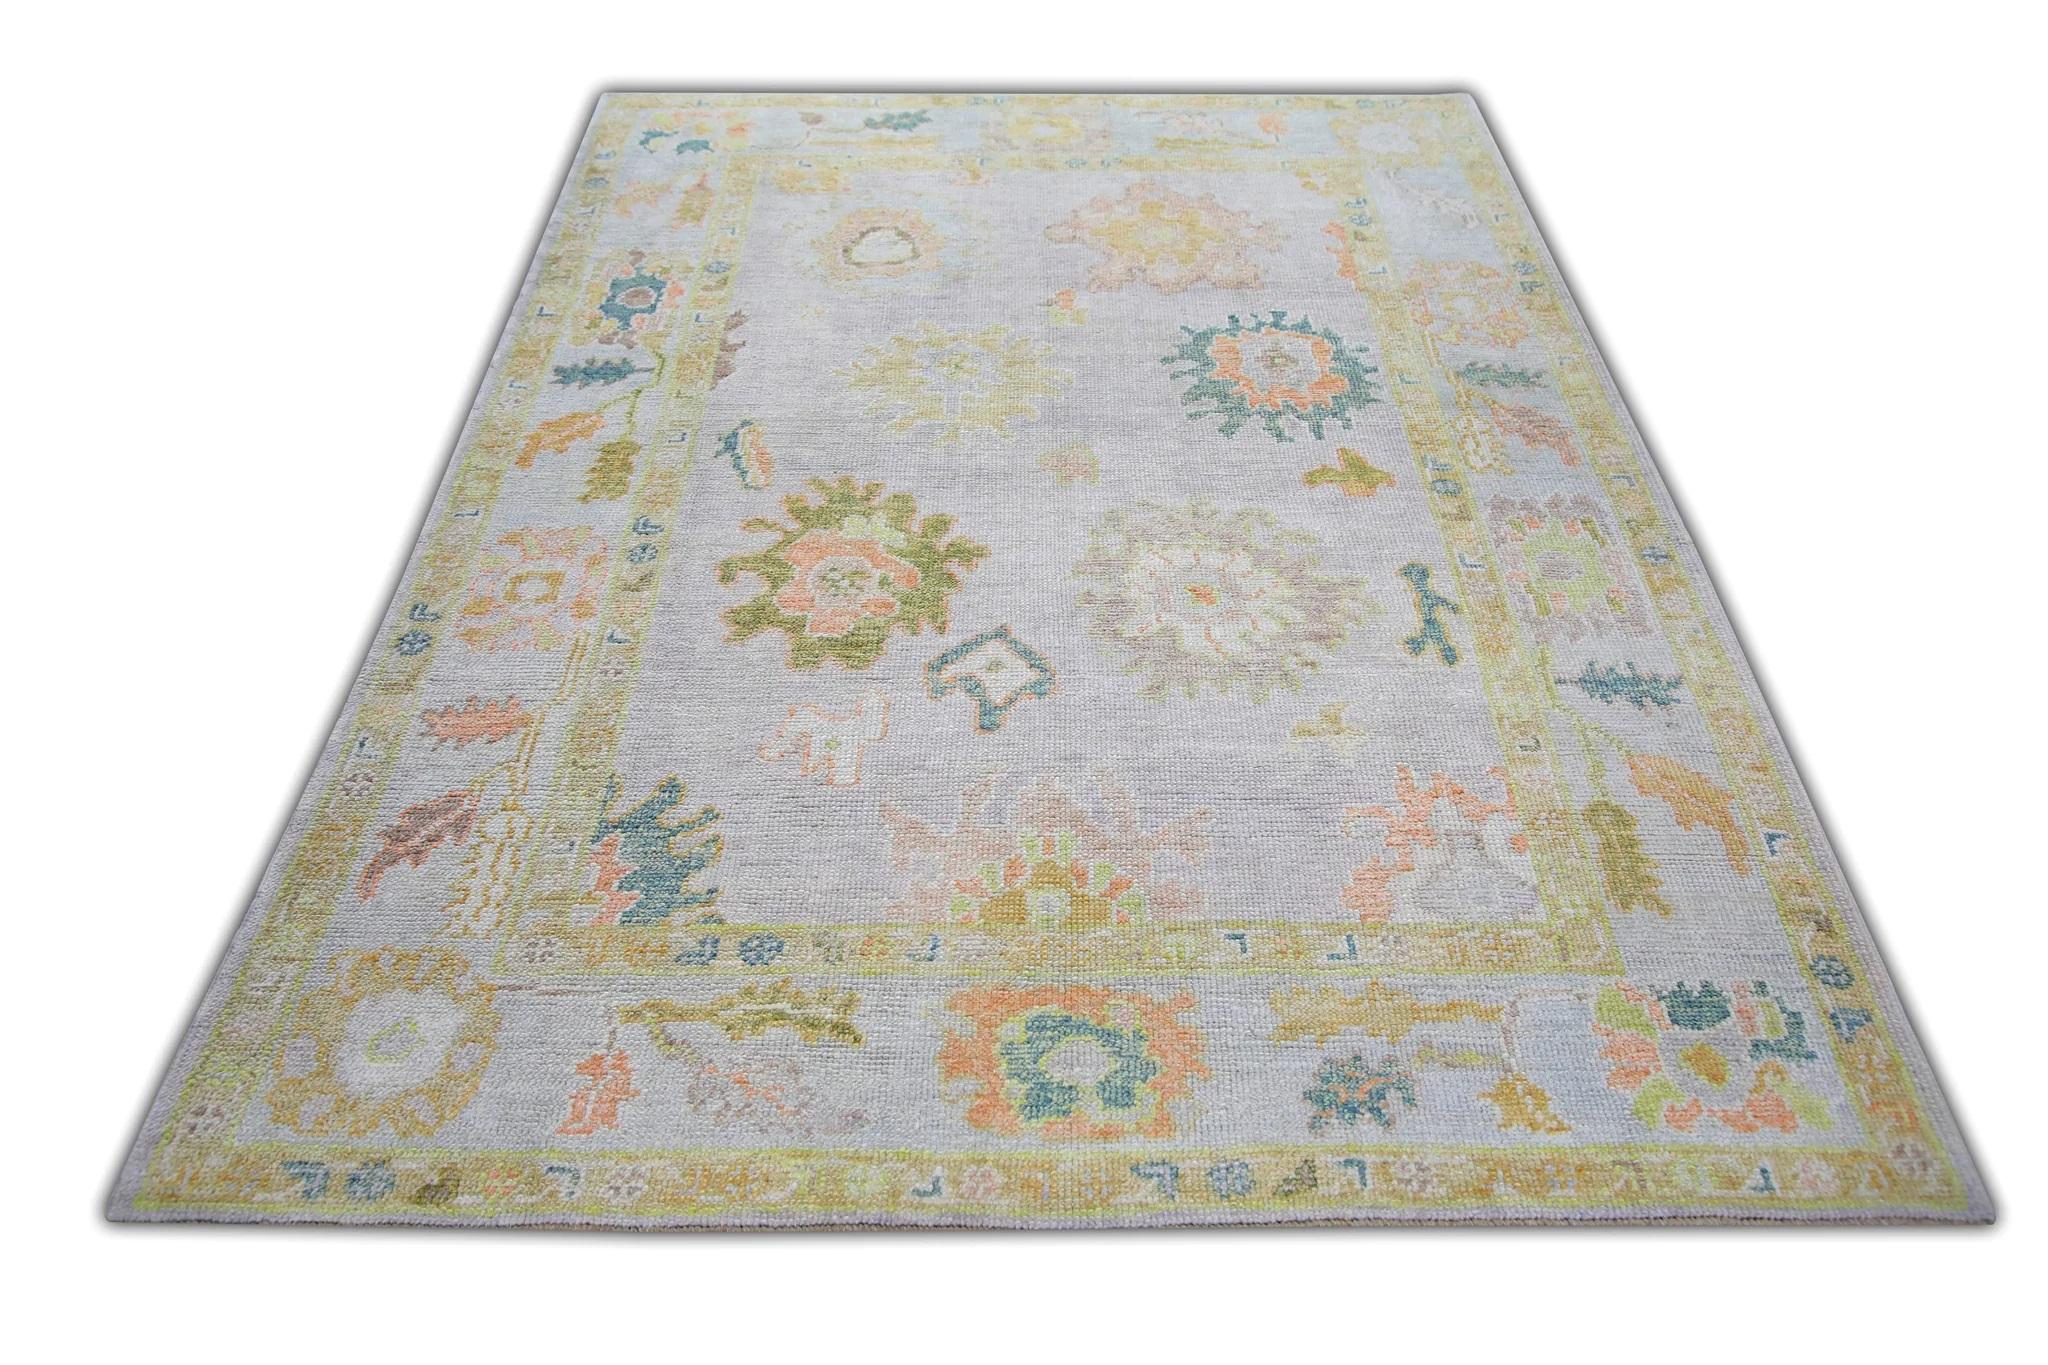 Contemporary Pastel Lilac Floral Handwoven Wool Turkish Oushak Rug 5' x 6'11